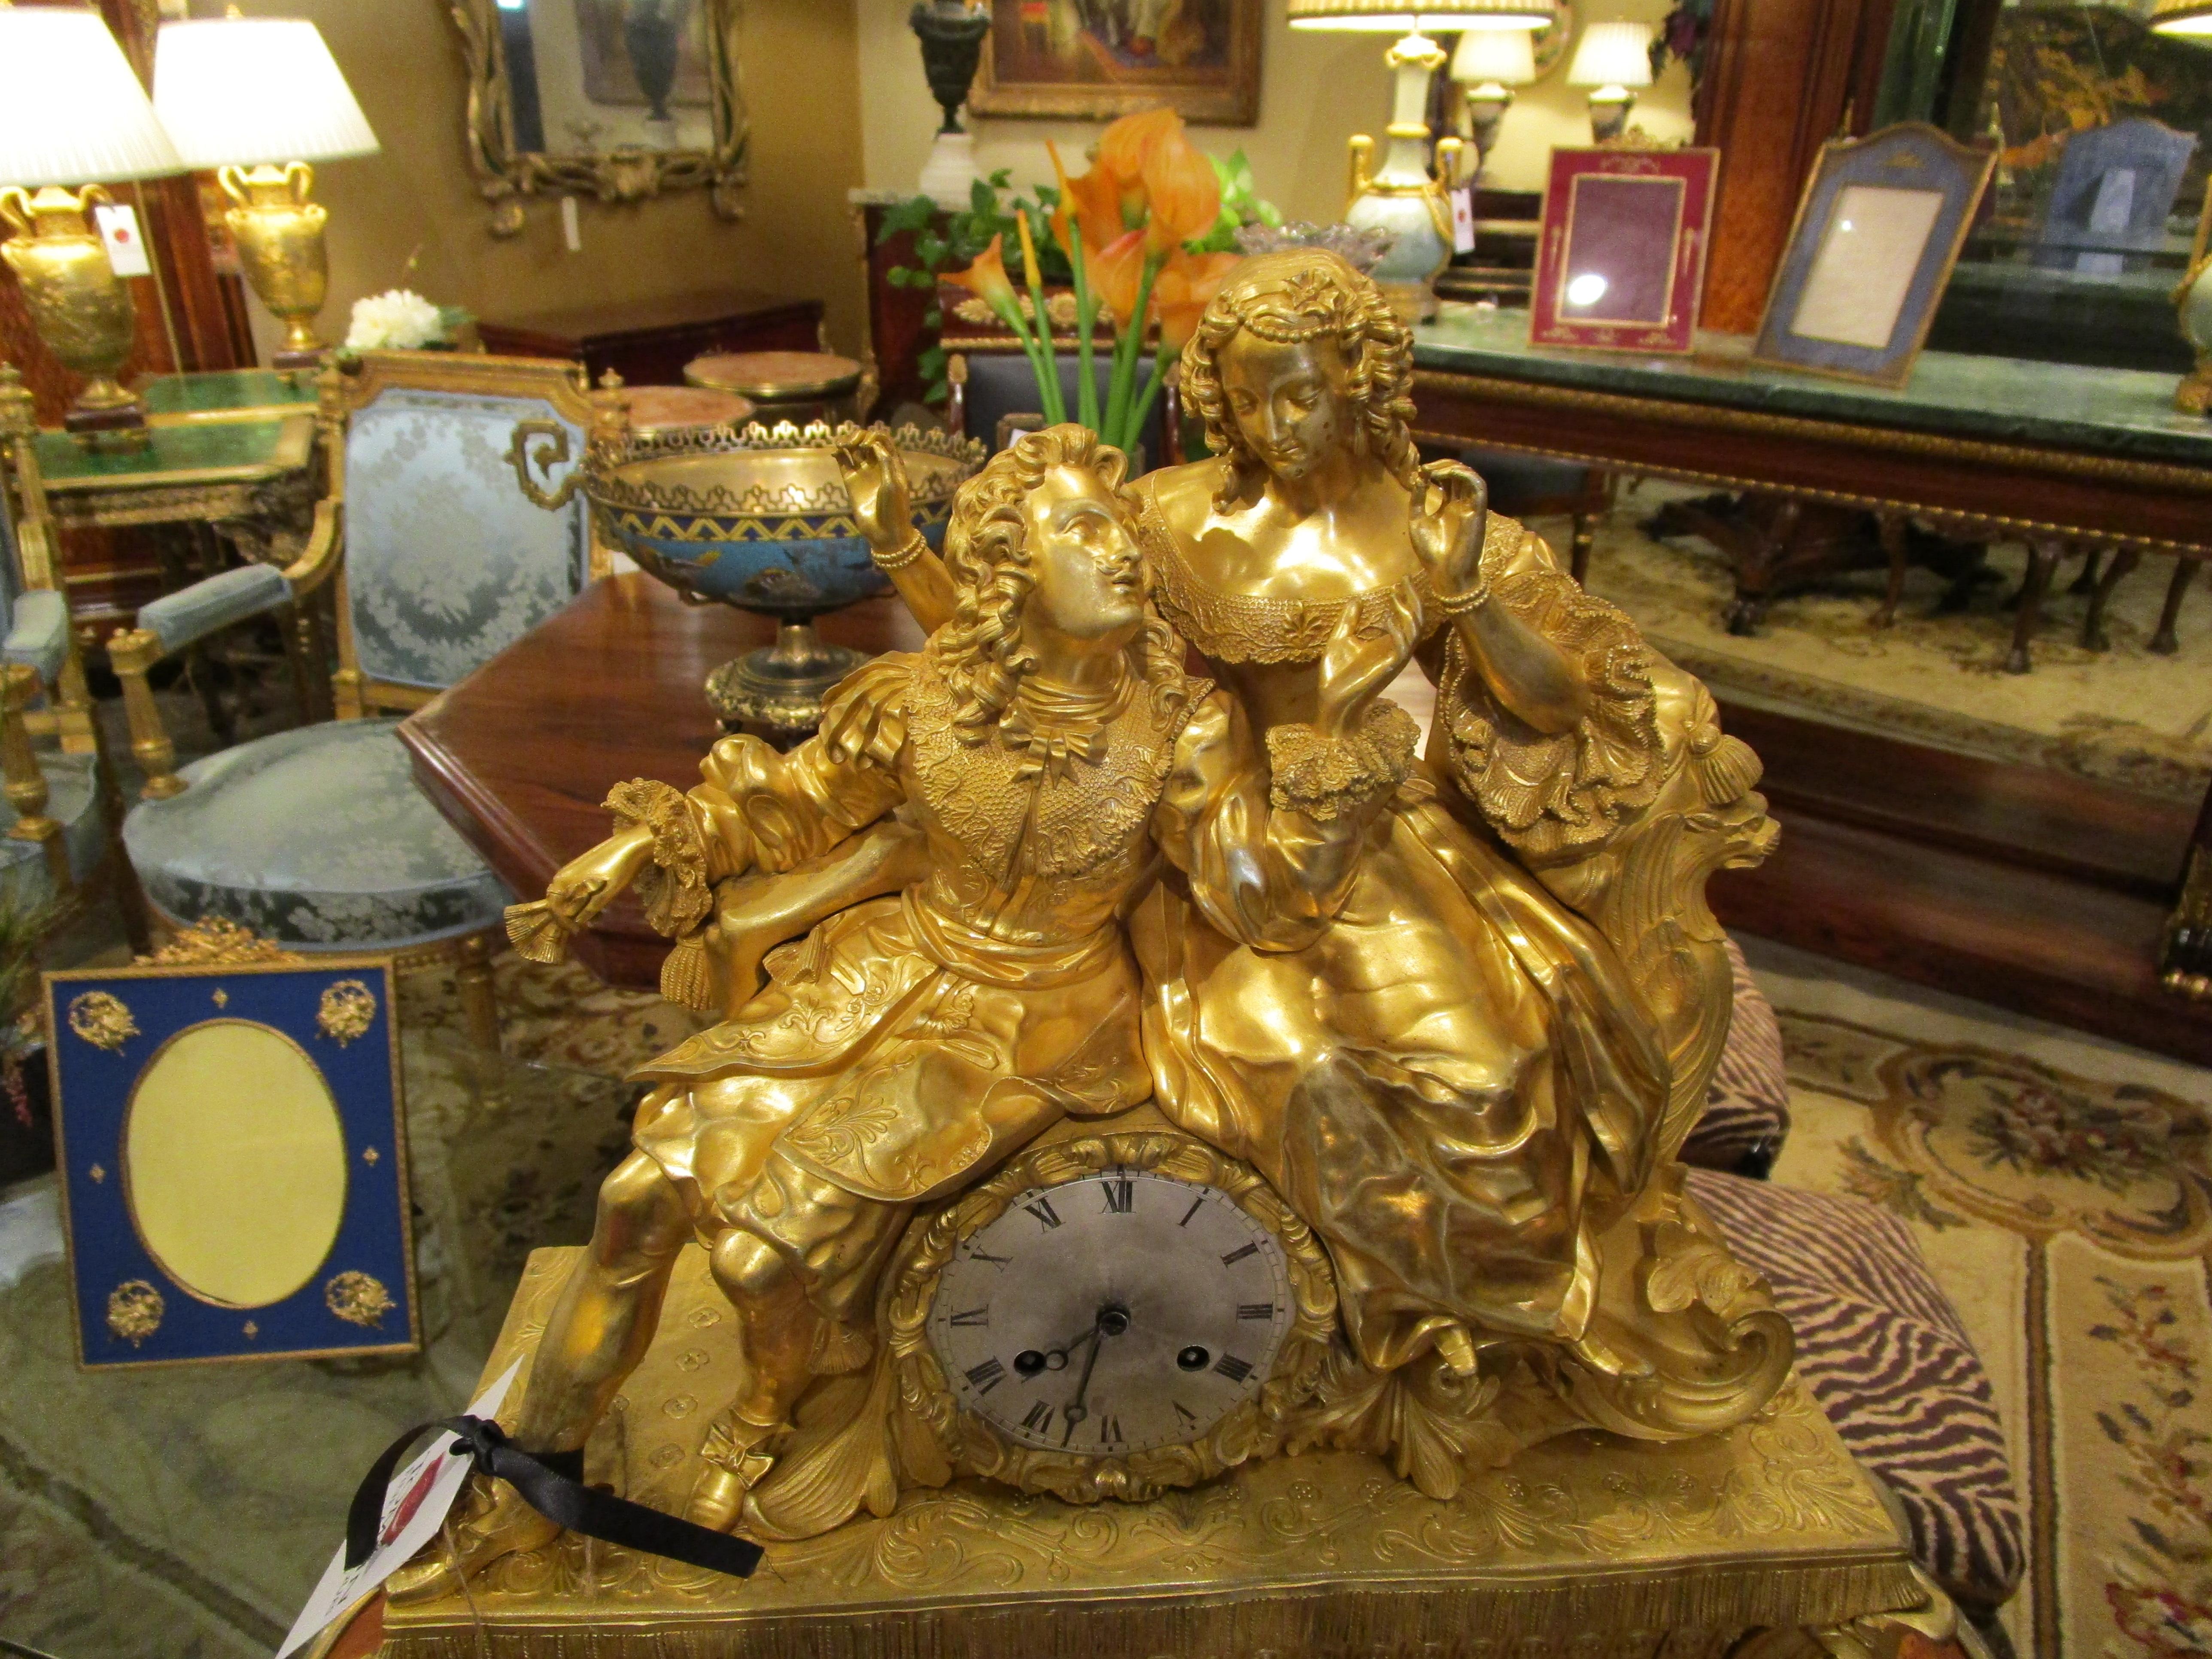 A fine 19th century Louis Philippe fire gilt large mantel clock. Depicting Louis XV and his wife Marie Leszczynska